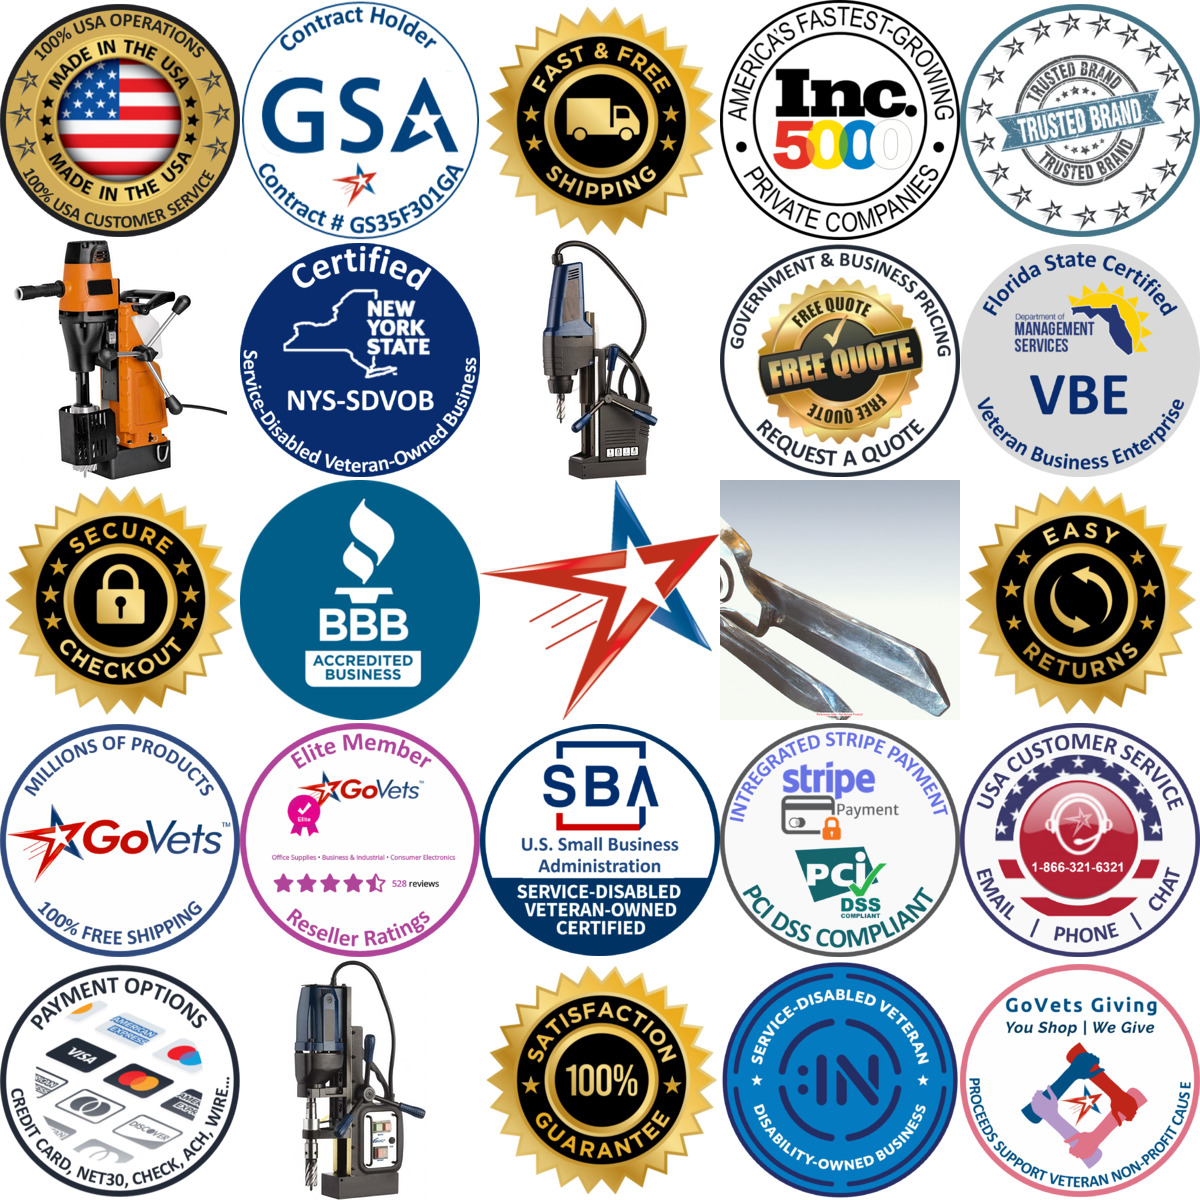 A selection of Cleveland Steel Tool products on GoVets